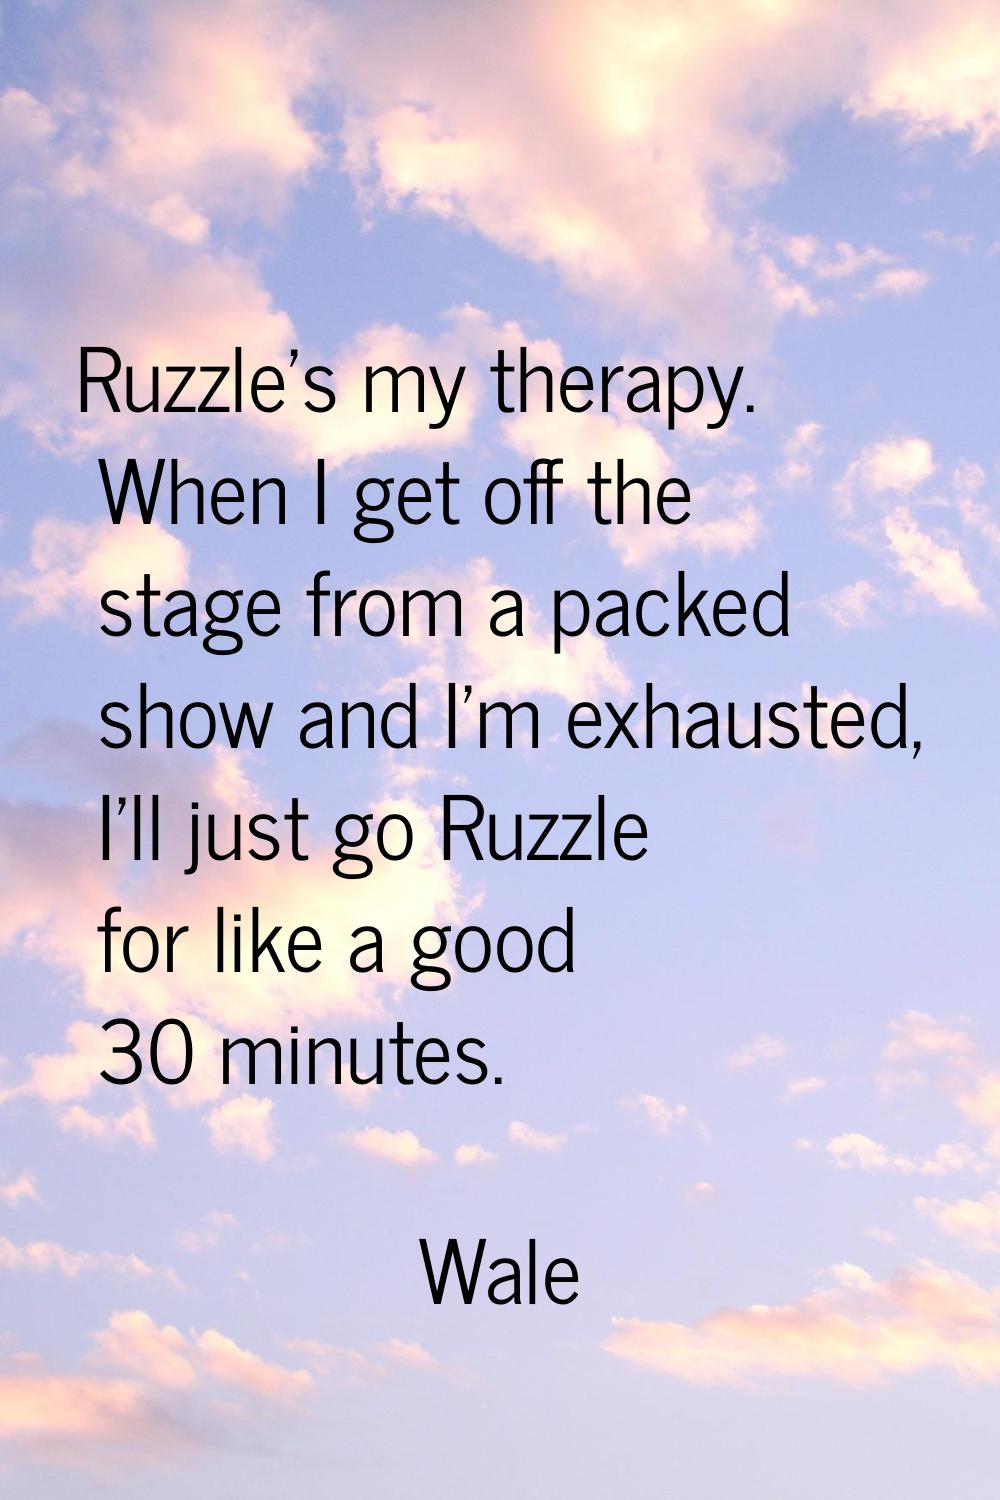 Ruzzle's my therapy. When I get off the stage from a packed show and I'm exhausted, I'll just go Ru